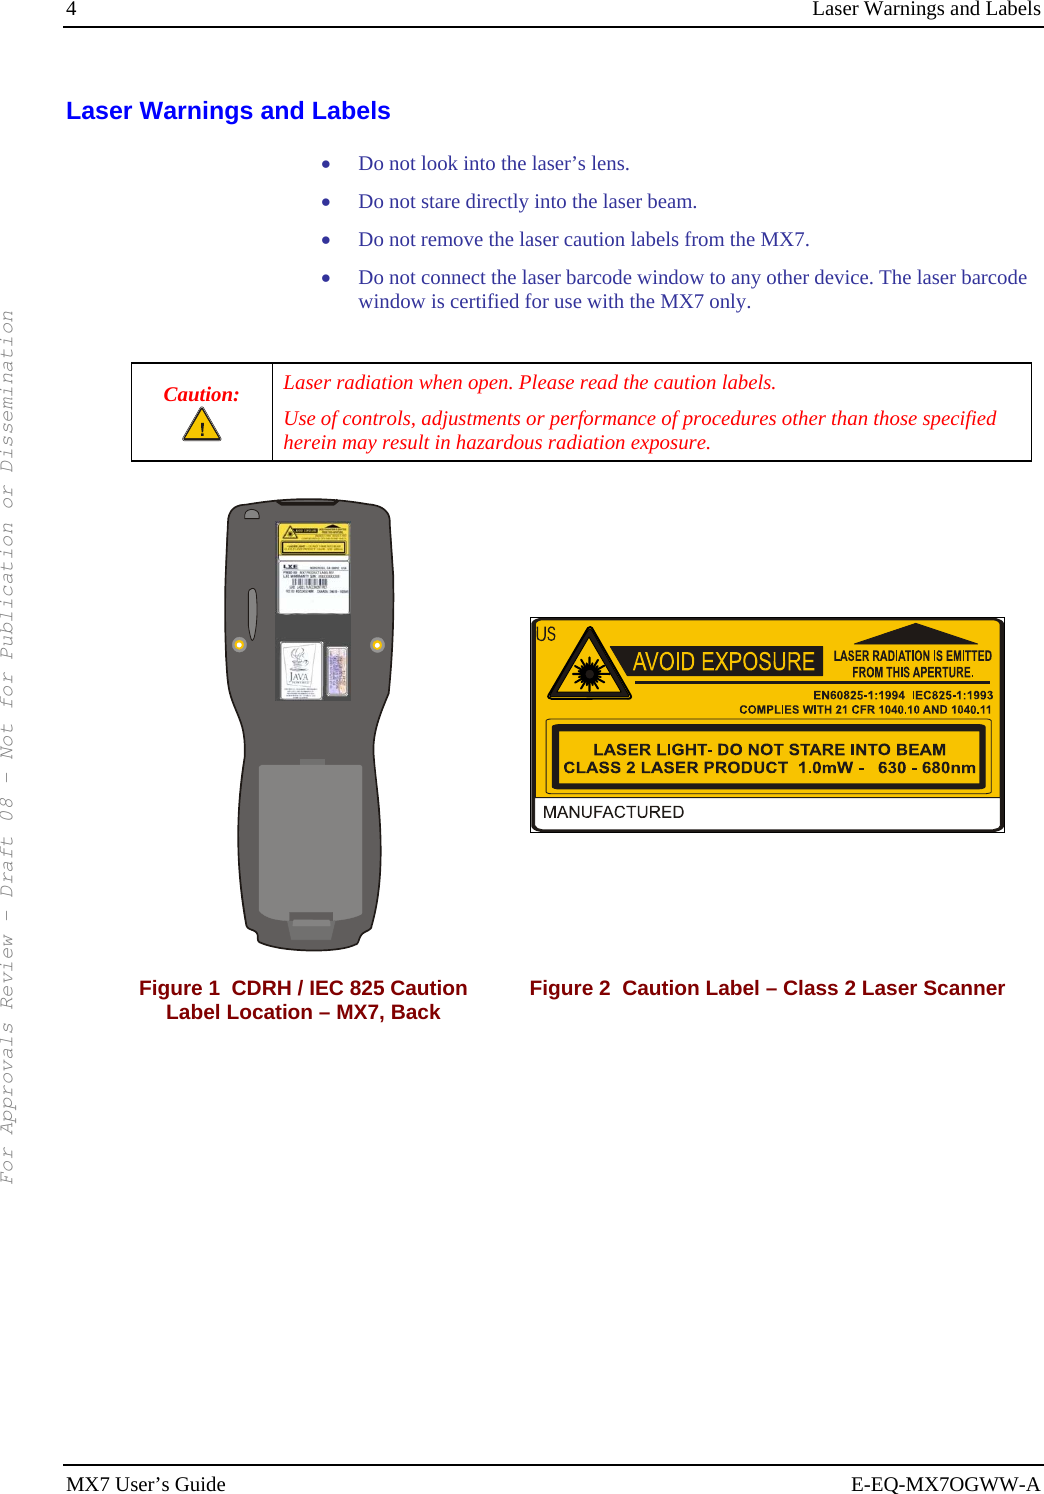 4  Laser Warnings and Labels MX7 User’s Guide  E-EQ-MX7OGWW-A Laser Warnings and Labels • Do not look into the laser’s lens. • Do not stare directly into the laser beam.  • Do not remove the laser caution labels from the MX7.  • Do not connect the laser barcode window to any other device. The laser barcode window is certified for use with the MX7 only.  Caution:  Laser radiation when open. Please read the caution labels. Use of controls, adjustments or performance of procedures other than those specified herein may result in hazardous radiation exposure.         Figure 1  CDRH / IEC 825 Caution Label Location – MX7, Back  Figure 2  Caution Label – Class 2 Laser Scanner  For Approvals Review - Draft 08 - Not for Publication or Dissemination